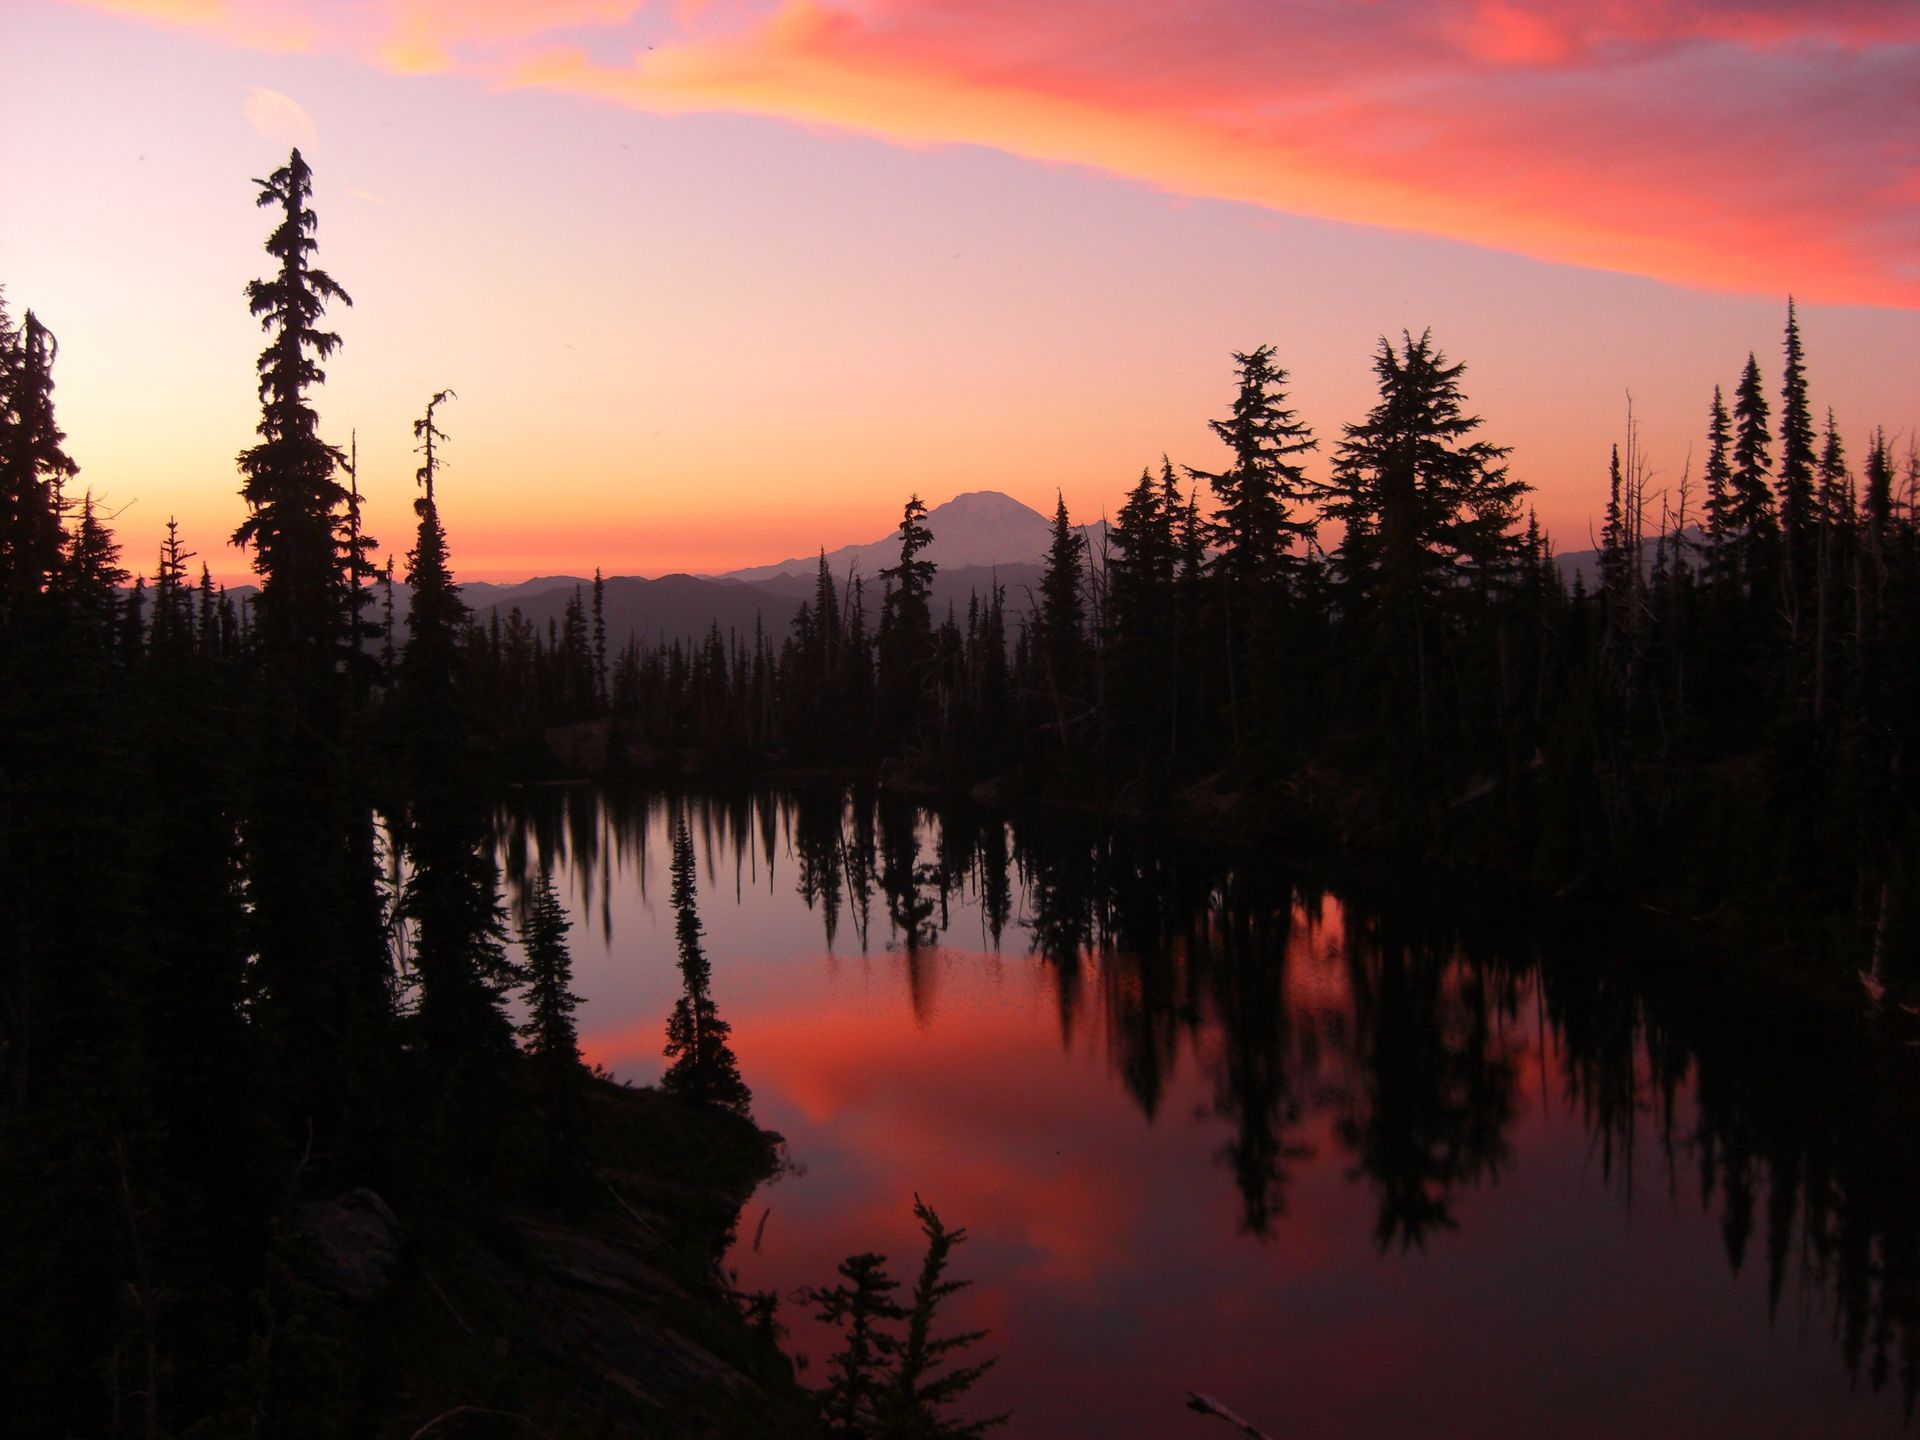 Tall pine trees line a lake at sunset.